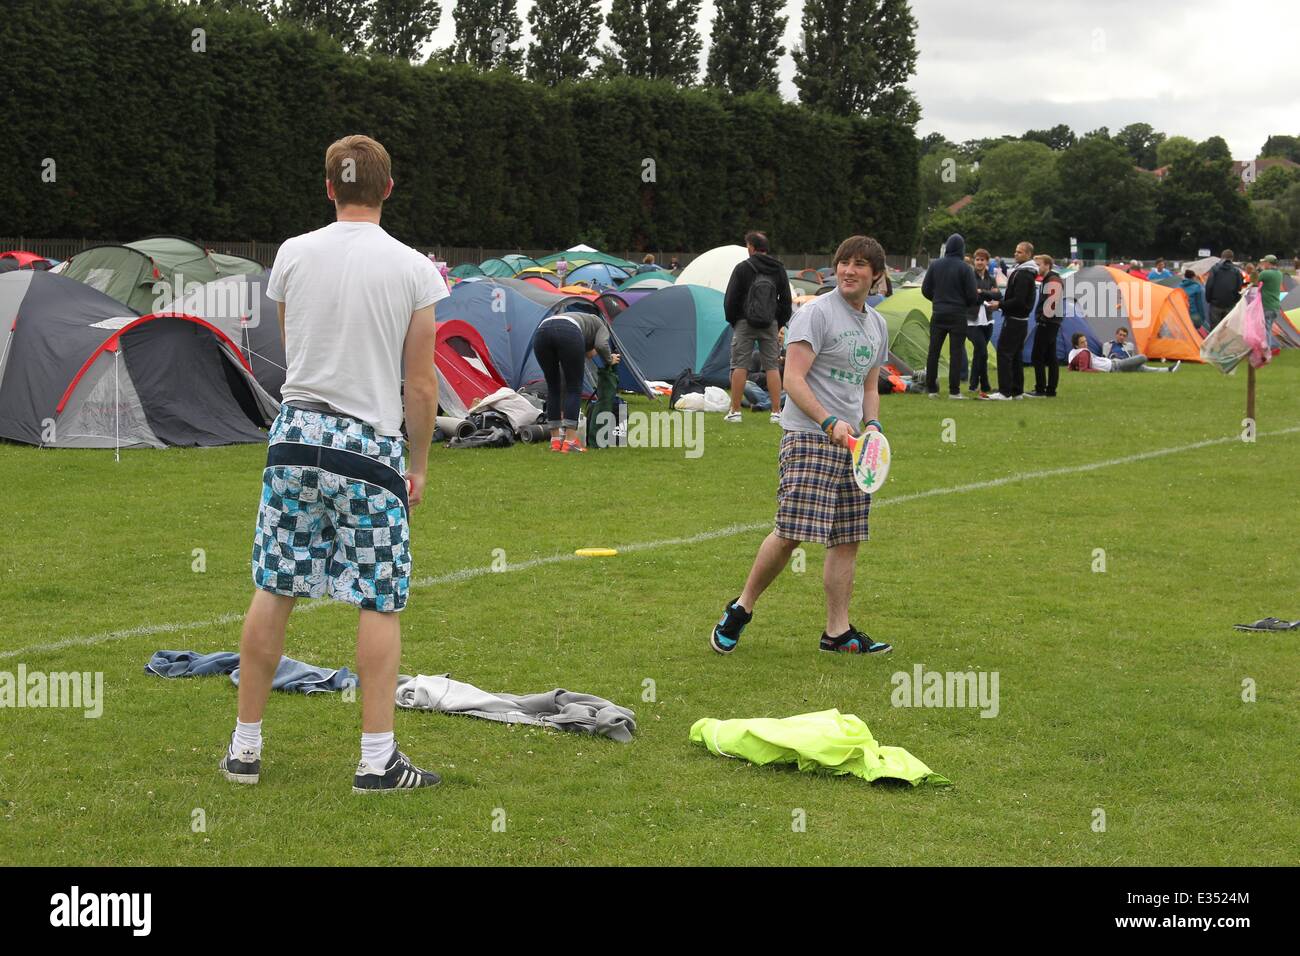 Tennis fans camp out at Wimbledon ahead of the opening day of the 2013 All England Lawn Tennis Championships. Some campers pass the time by playing their own form of tennis on the playing fields opposite.  Where: London, United Kingdom When: 23 Jun 2013 Stock Photo